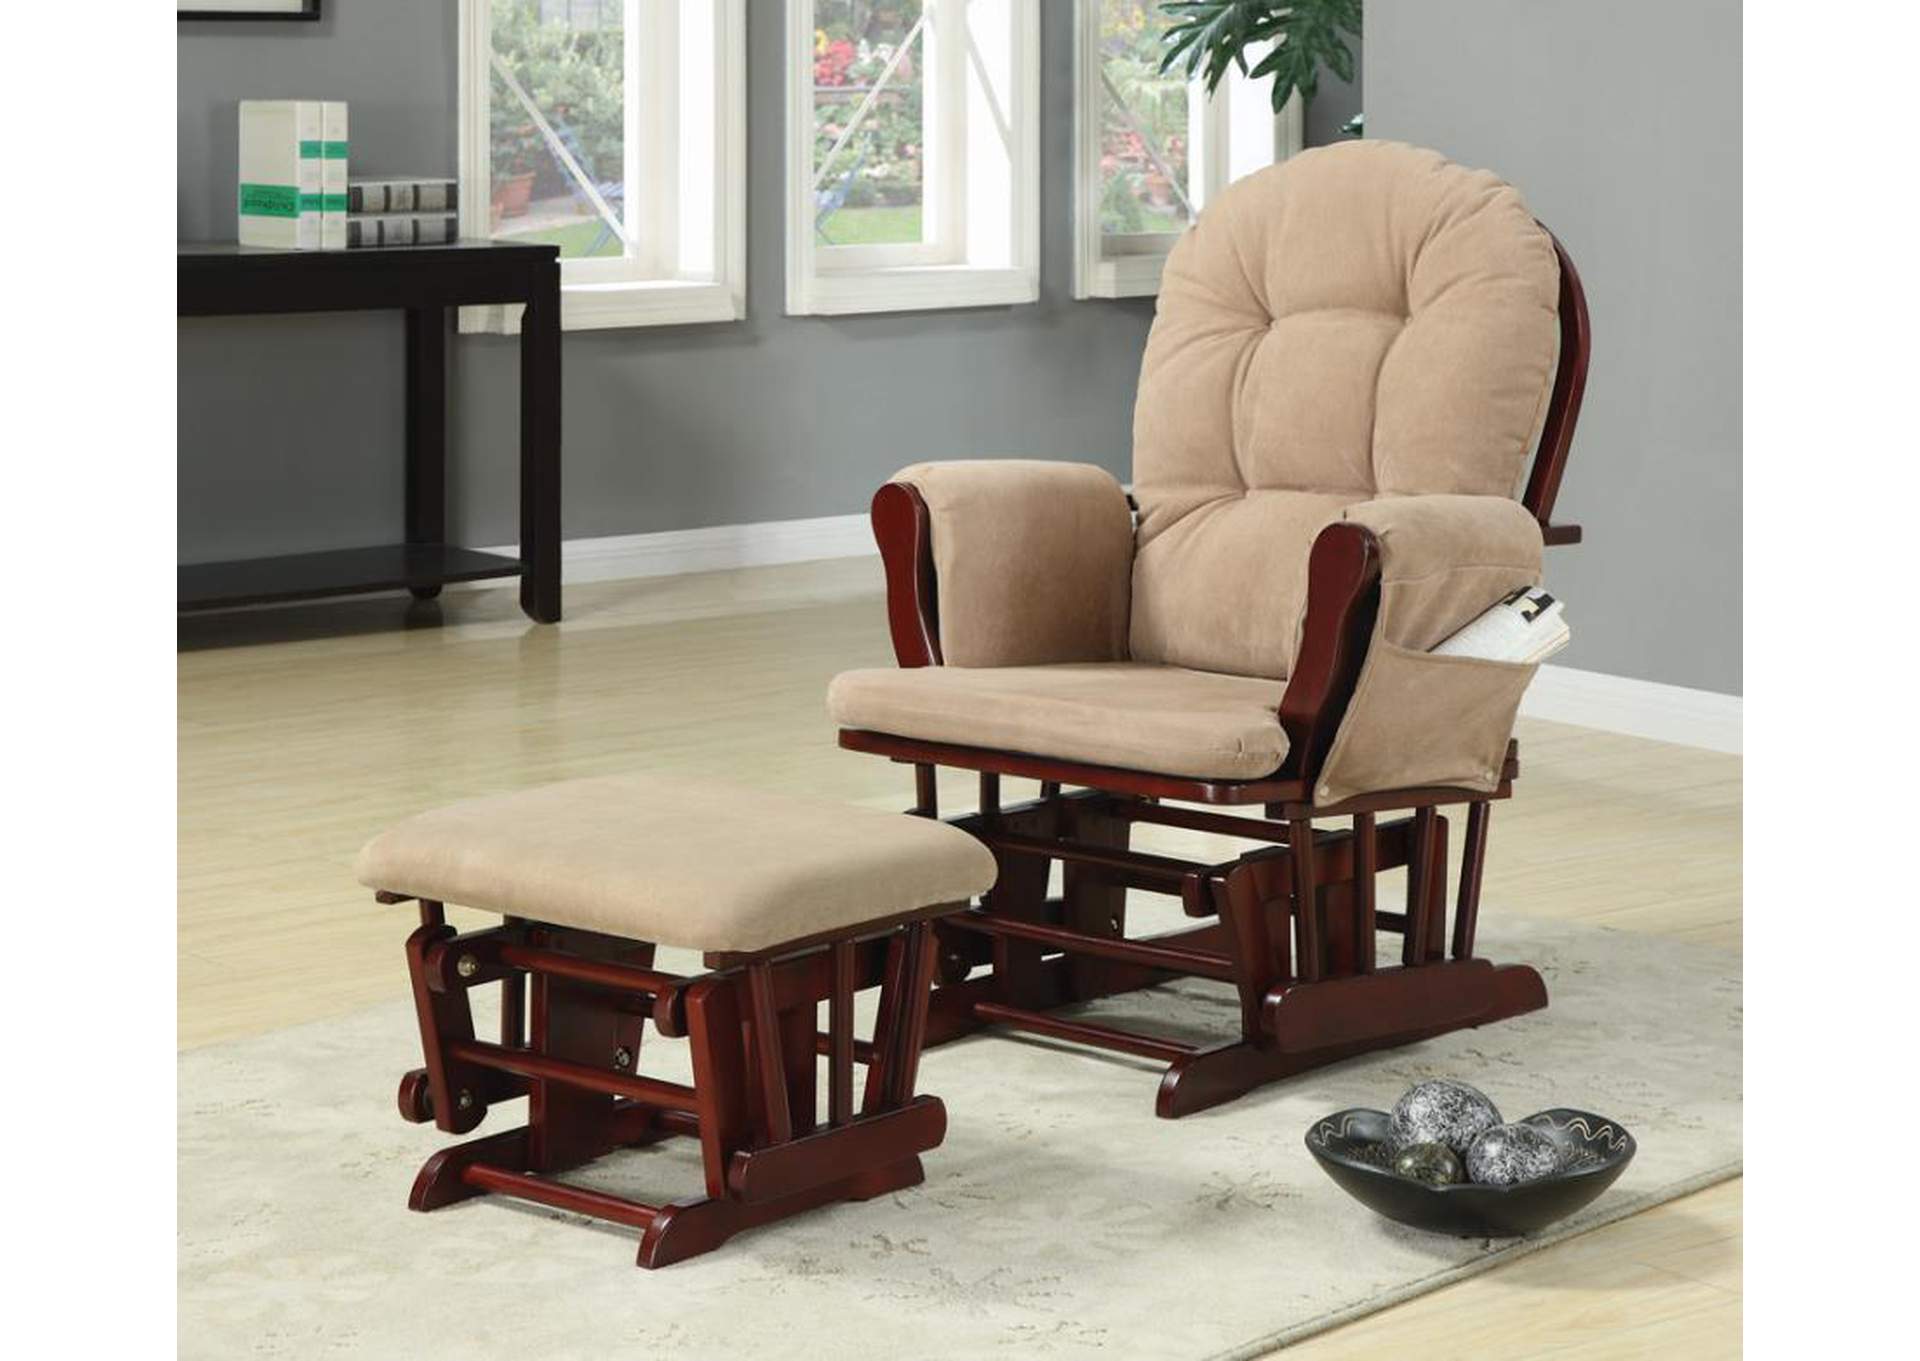 Upholstered Glider Rocker With Ottoman Tan,Coaster Furniture